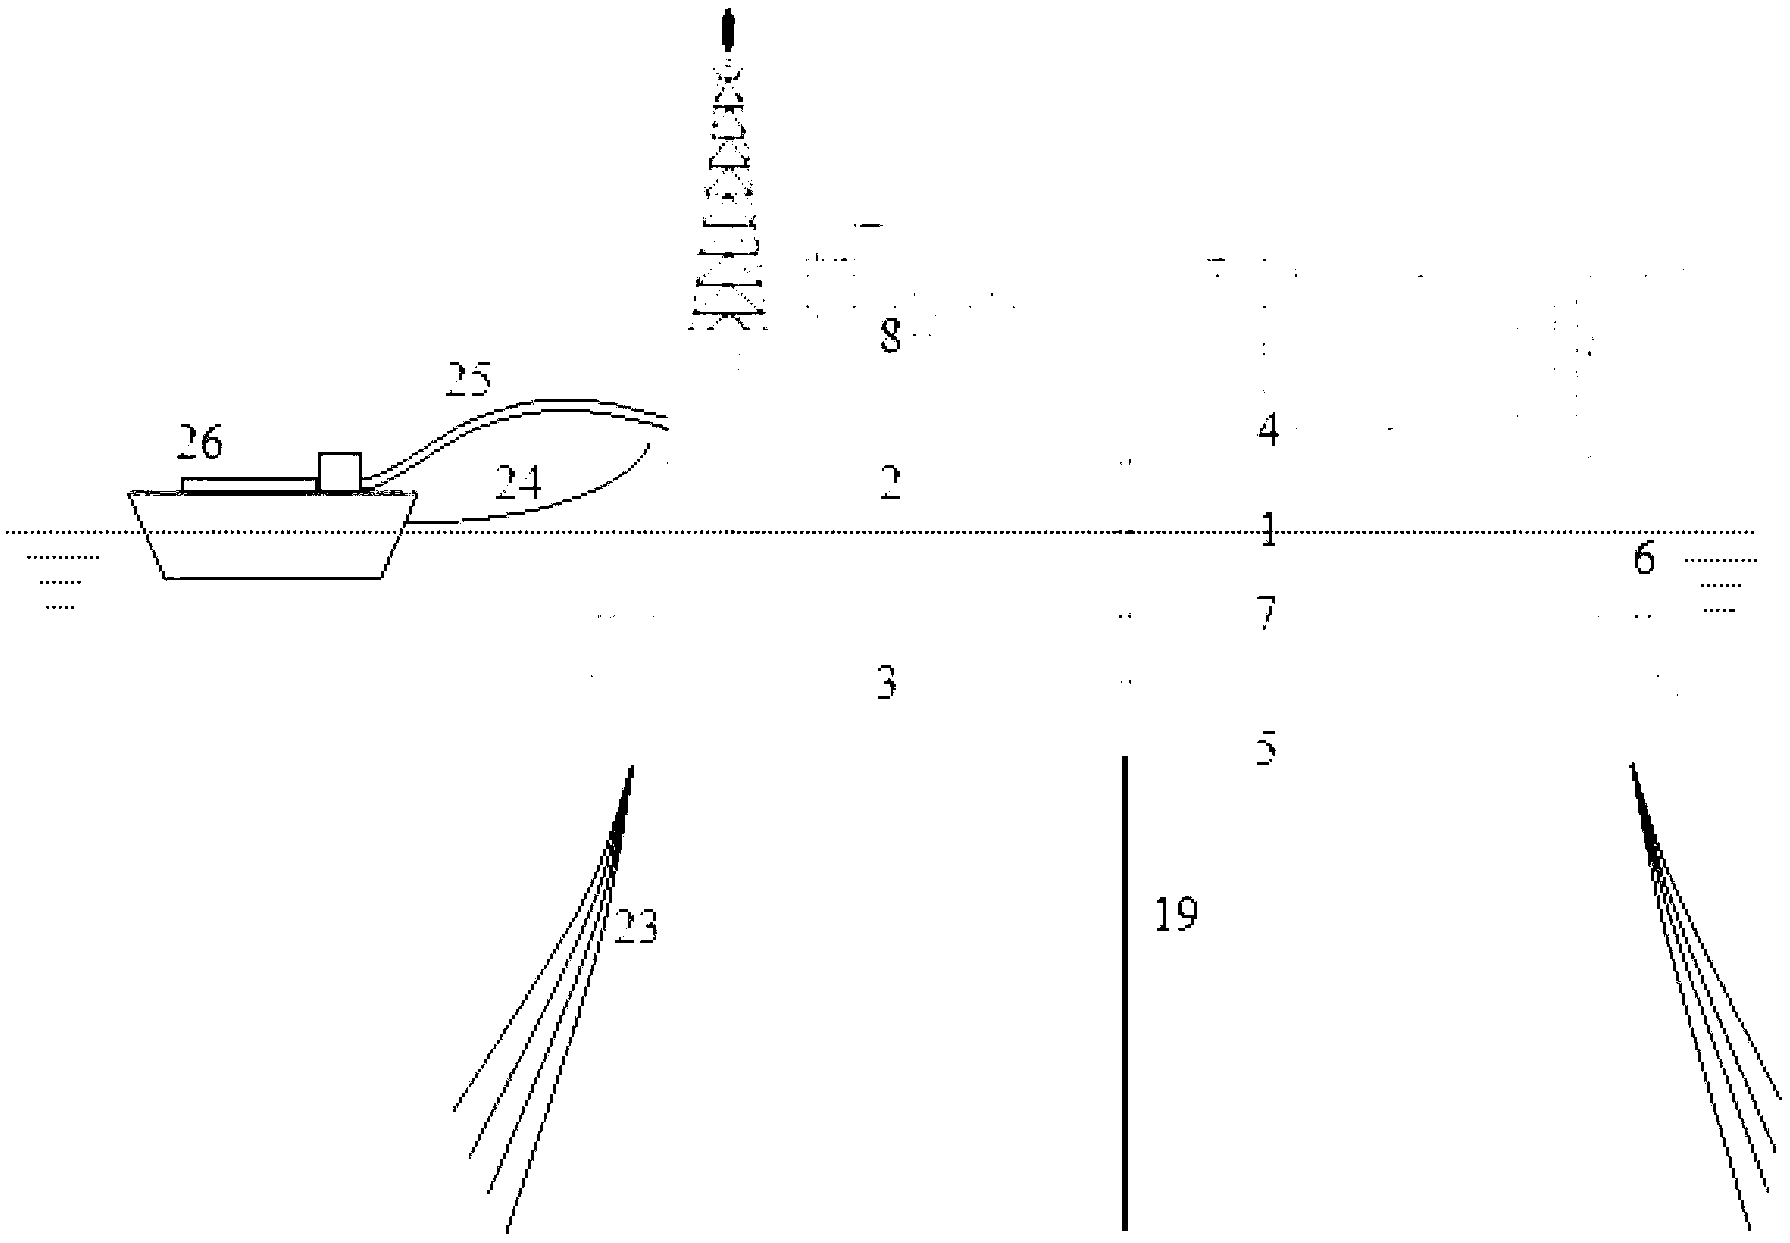 Butt joint circular table type floating production oil storage system